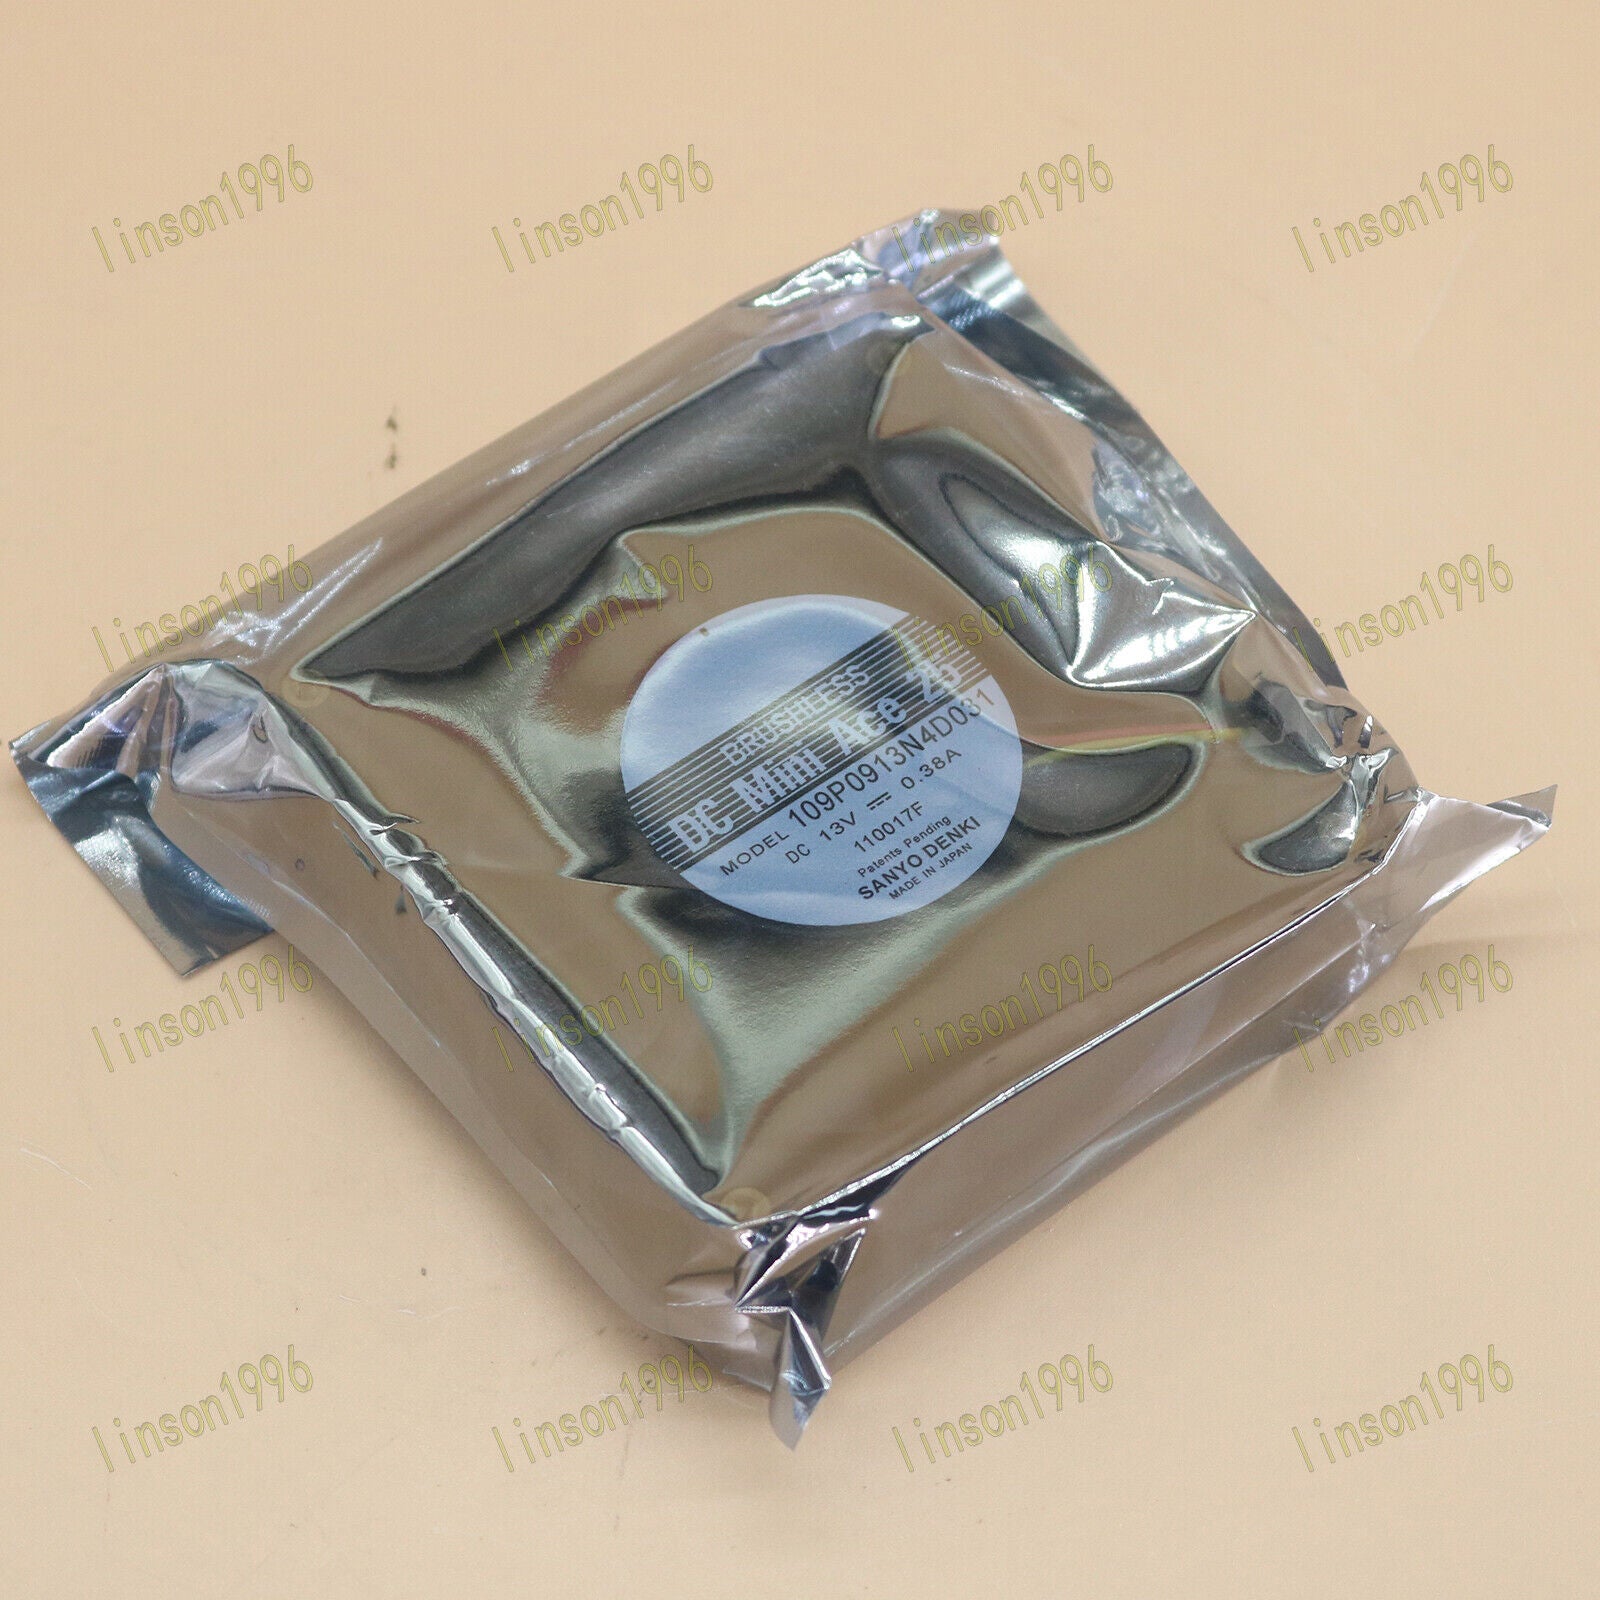 new  For Sanyo Fan 109P0913N4D031 13V 0.38A Fast ShiP